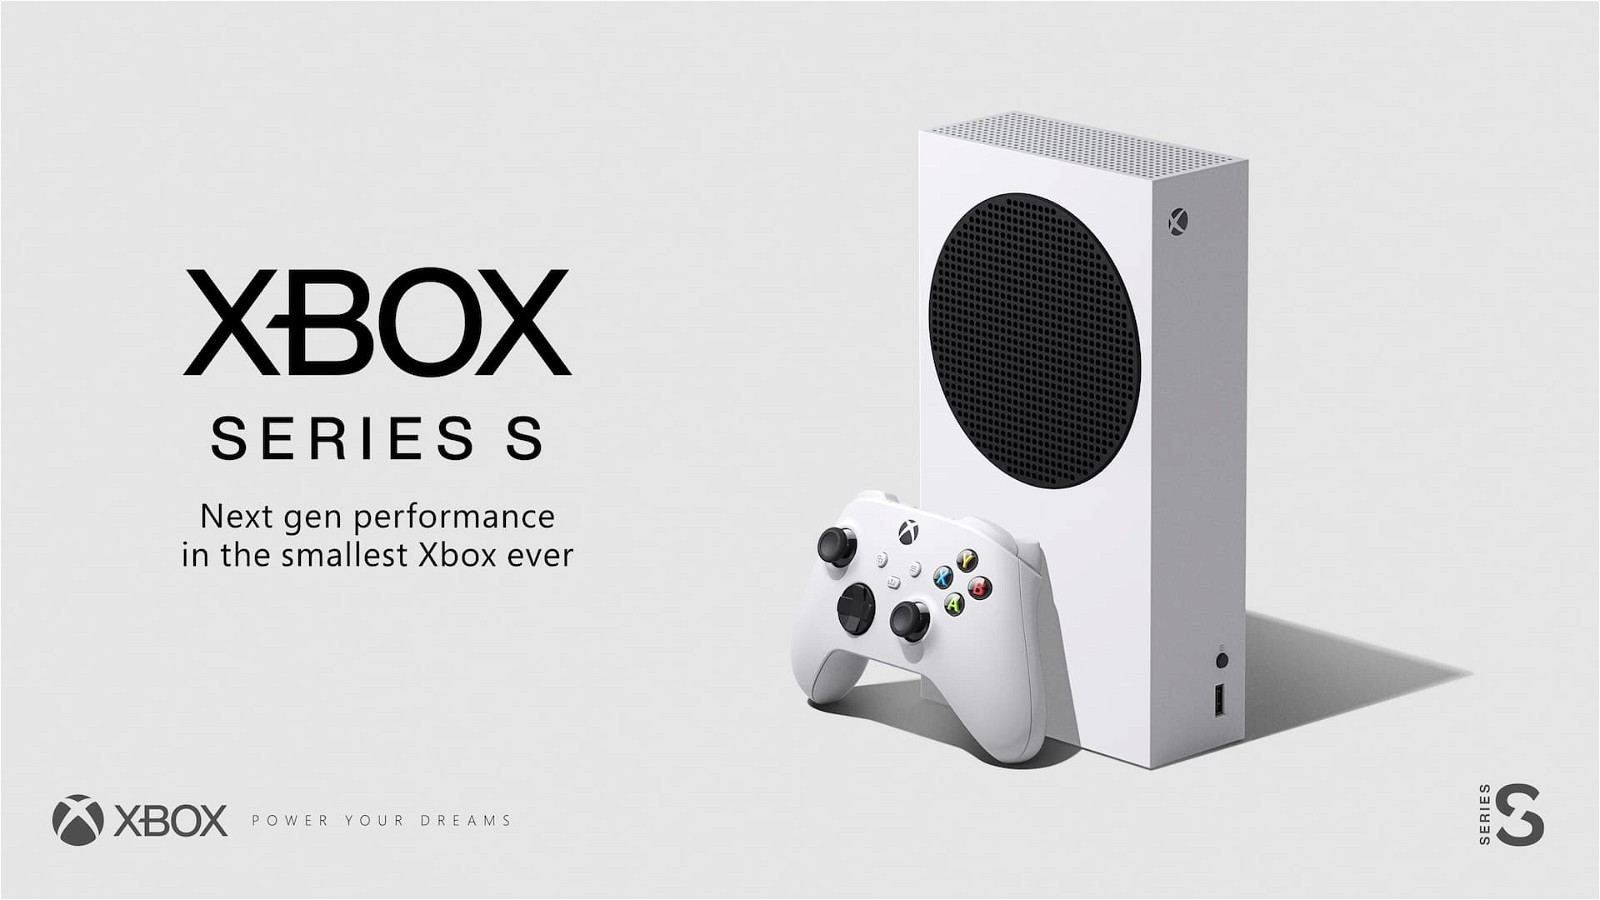 Xbox Series S only costs $299 and is an viable option for many